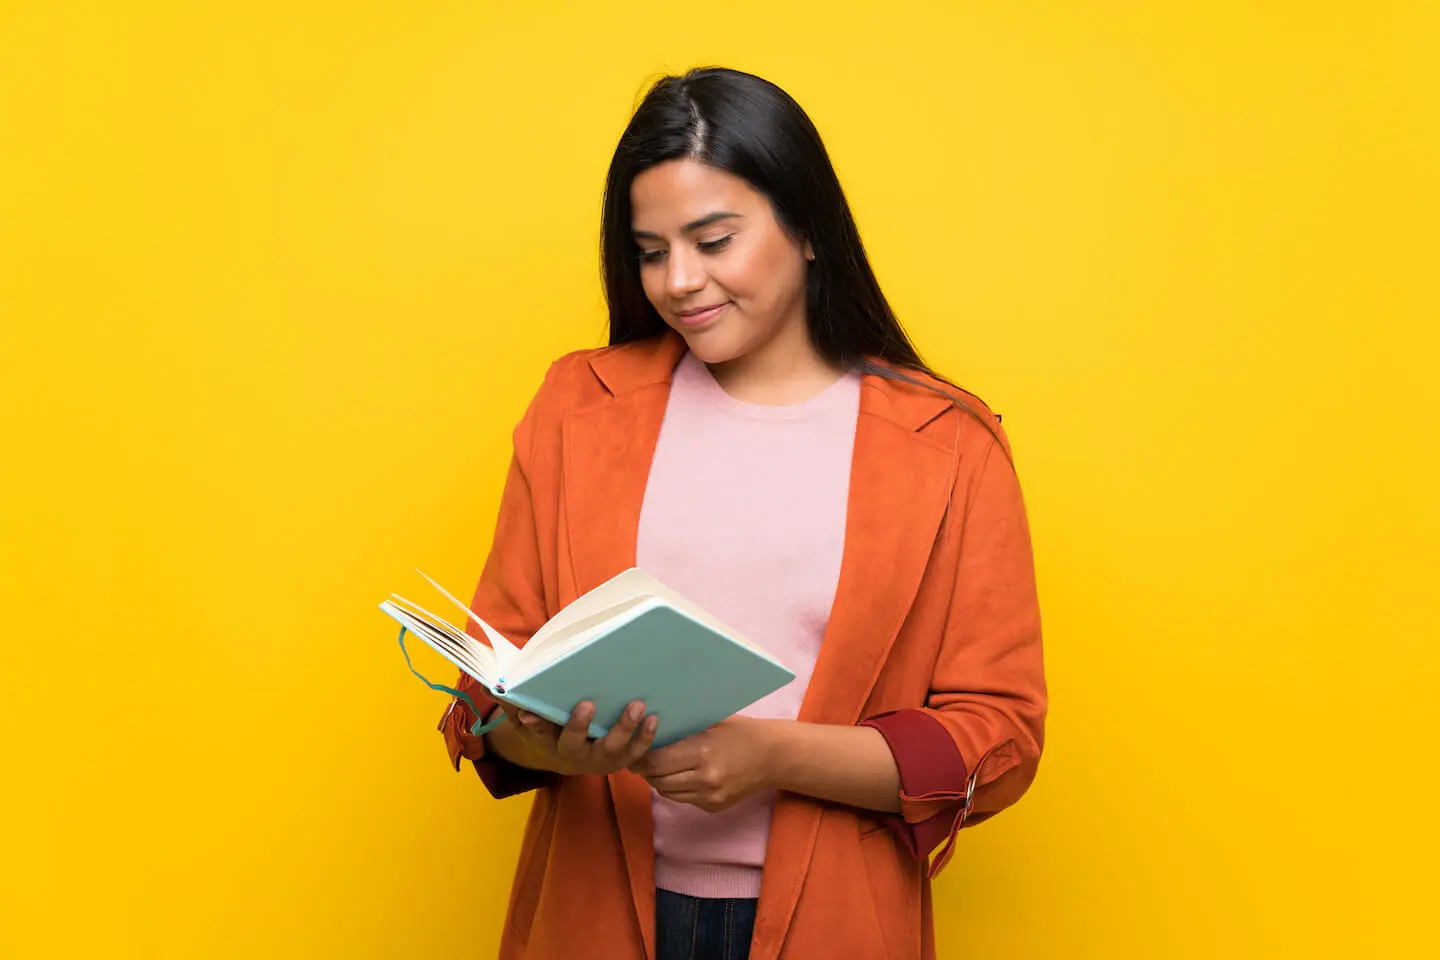 A teenage girl stands in front of a yellow background and reads a book